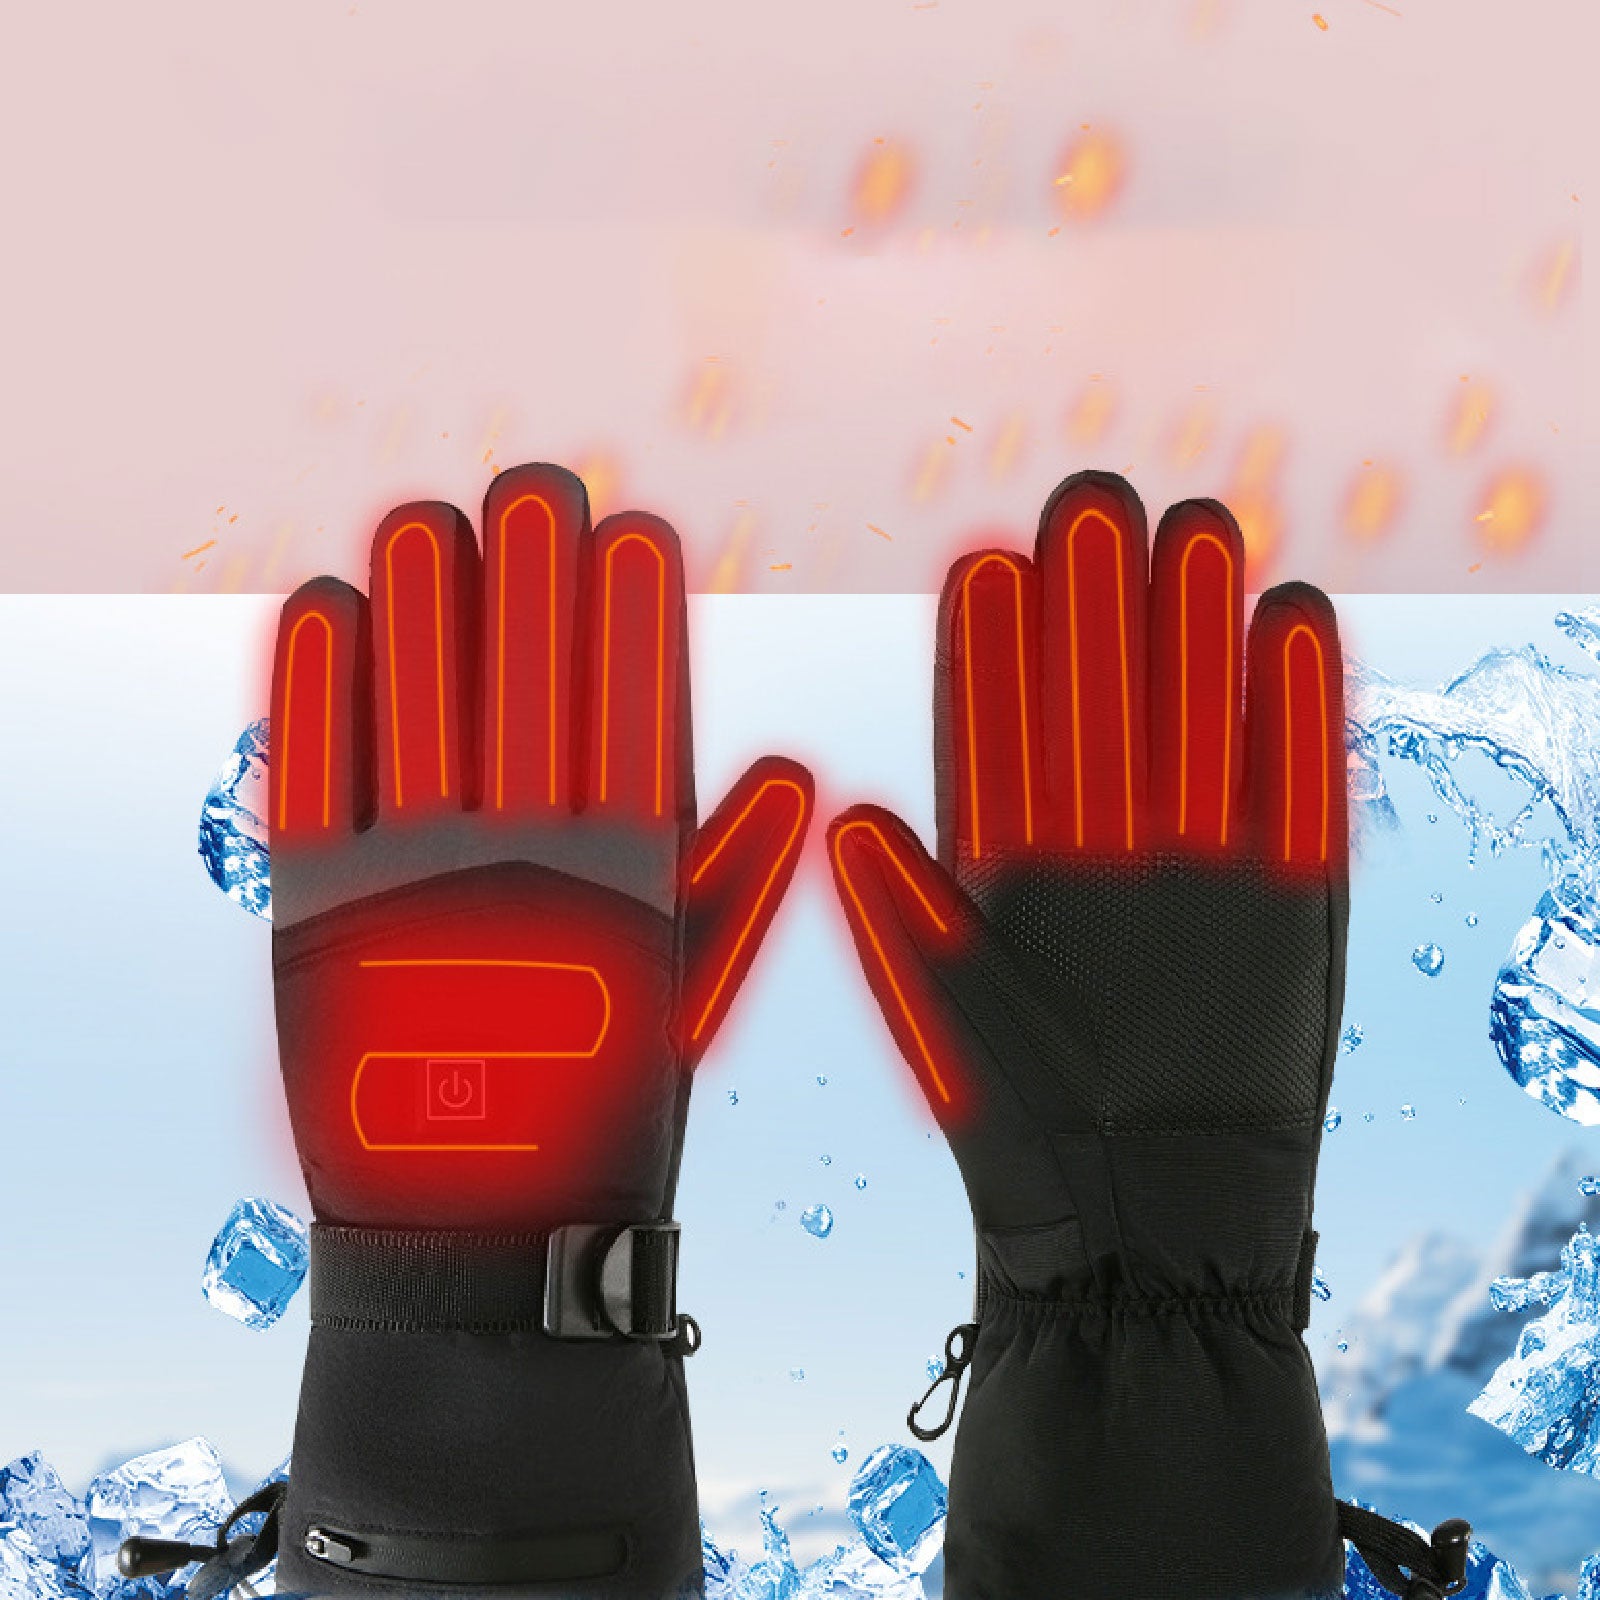 Heating Warm Gloves Electric Ski Gloves 3 Level Temperature Control For Climbing Skiing